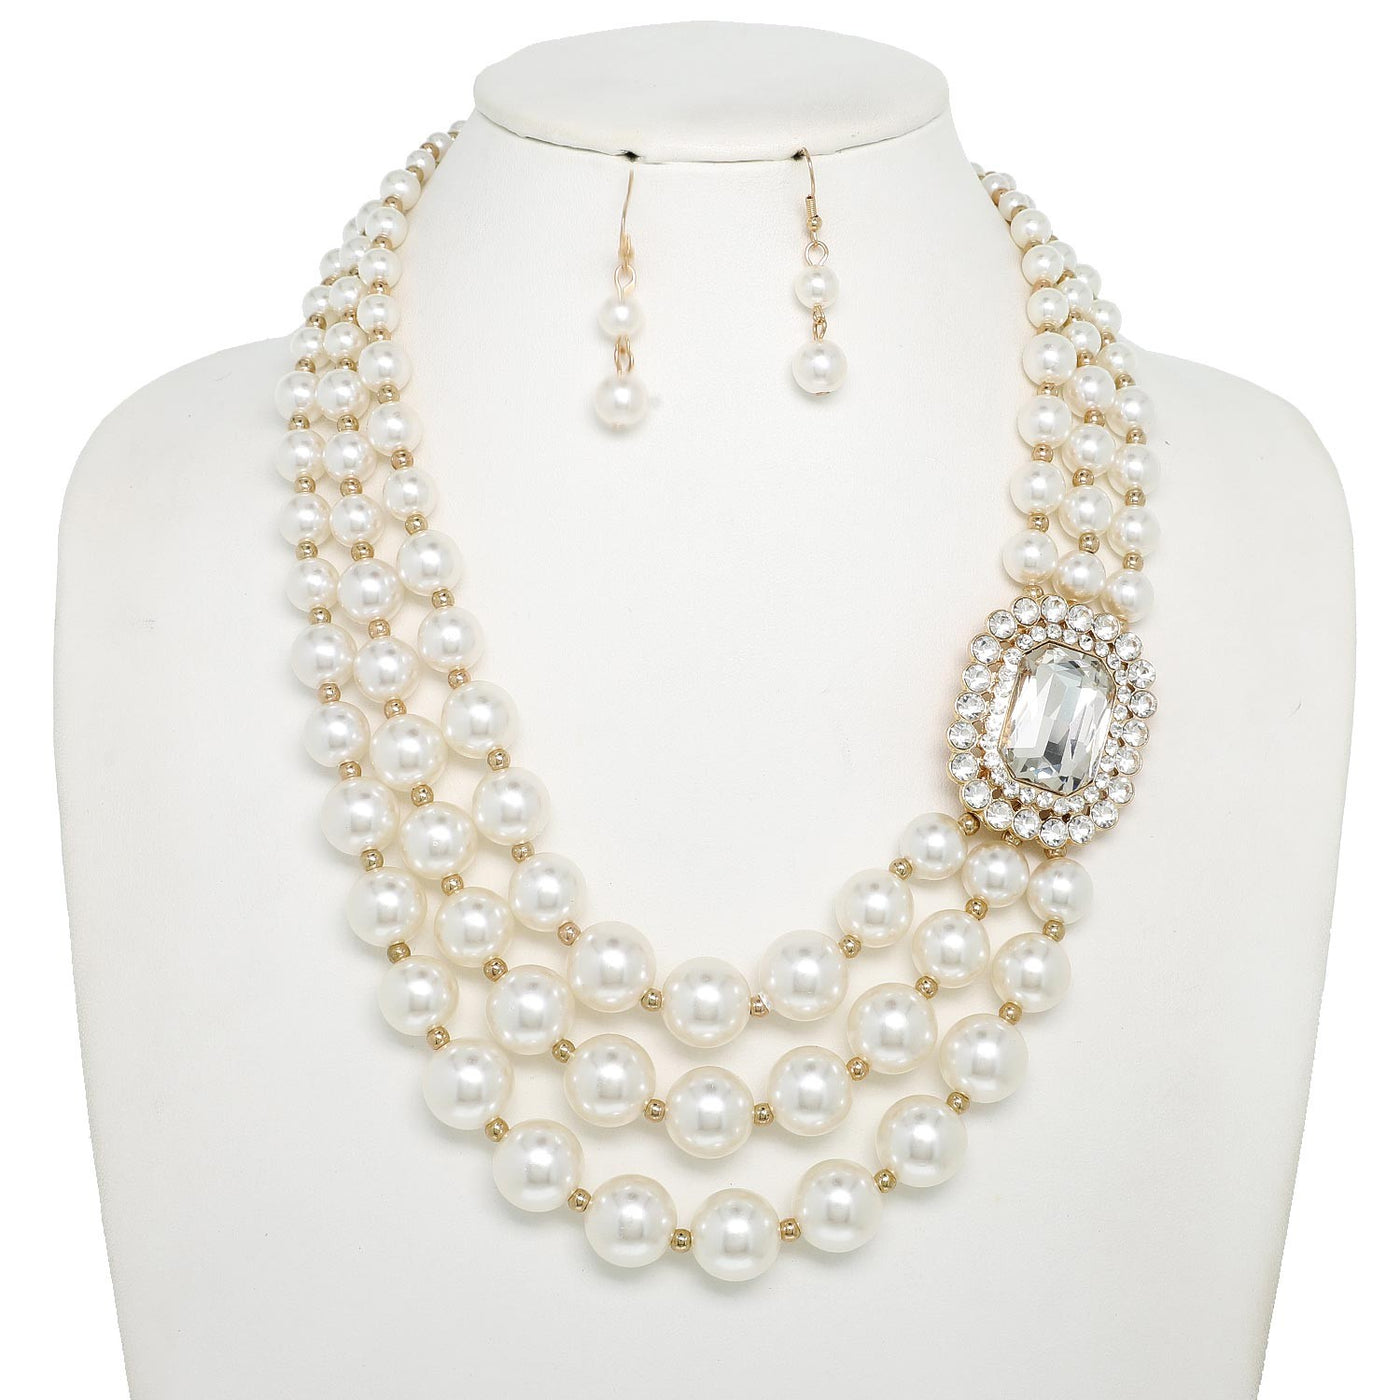 A Touch Of Elegance Necklace Set